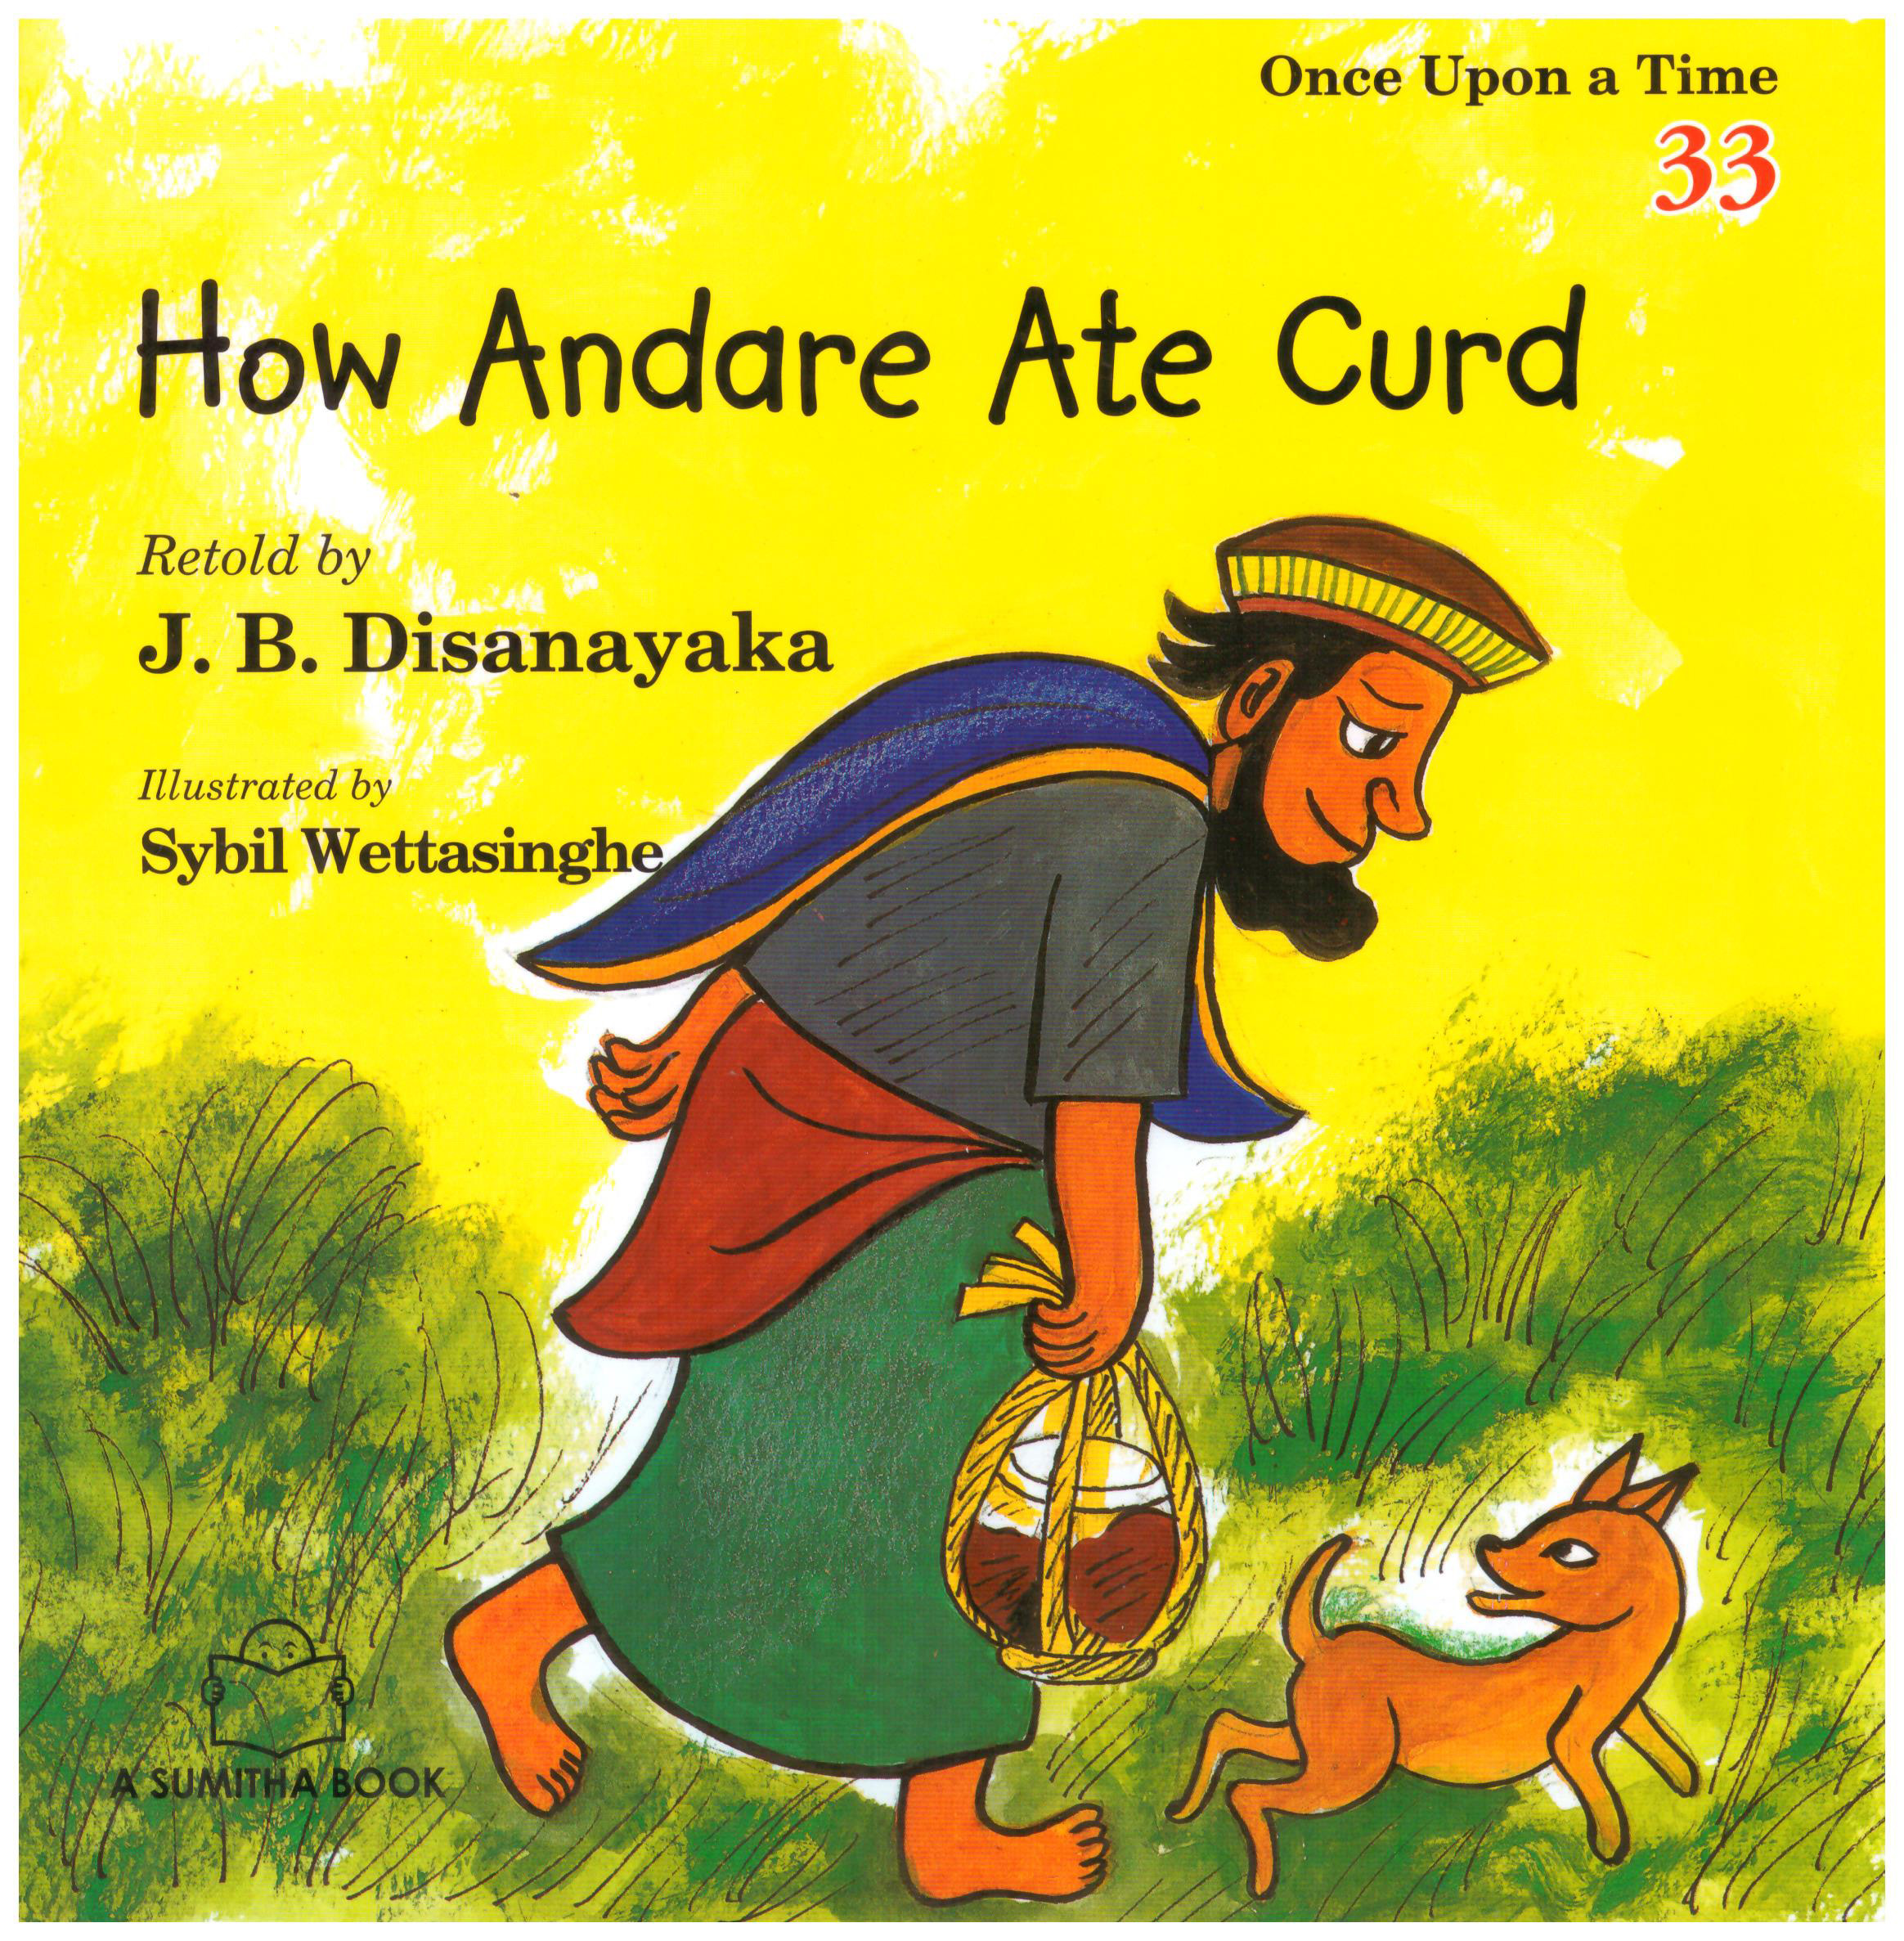 Once Upon a Time 33 - How Andare Ate Curd  